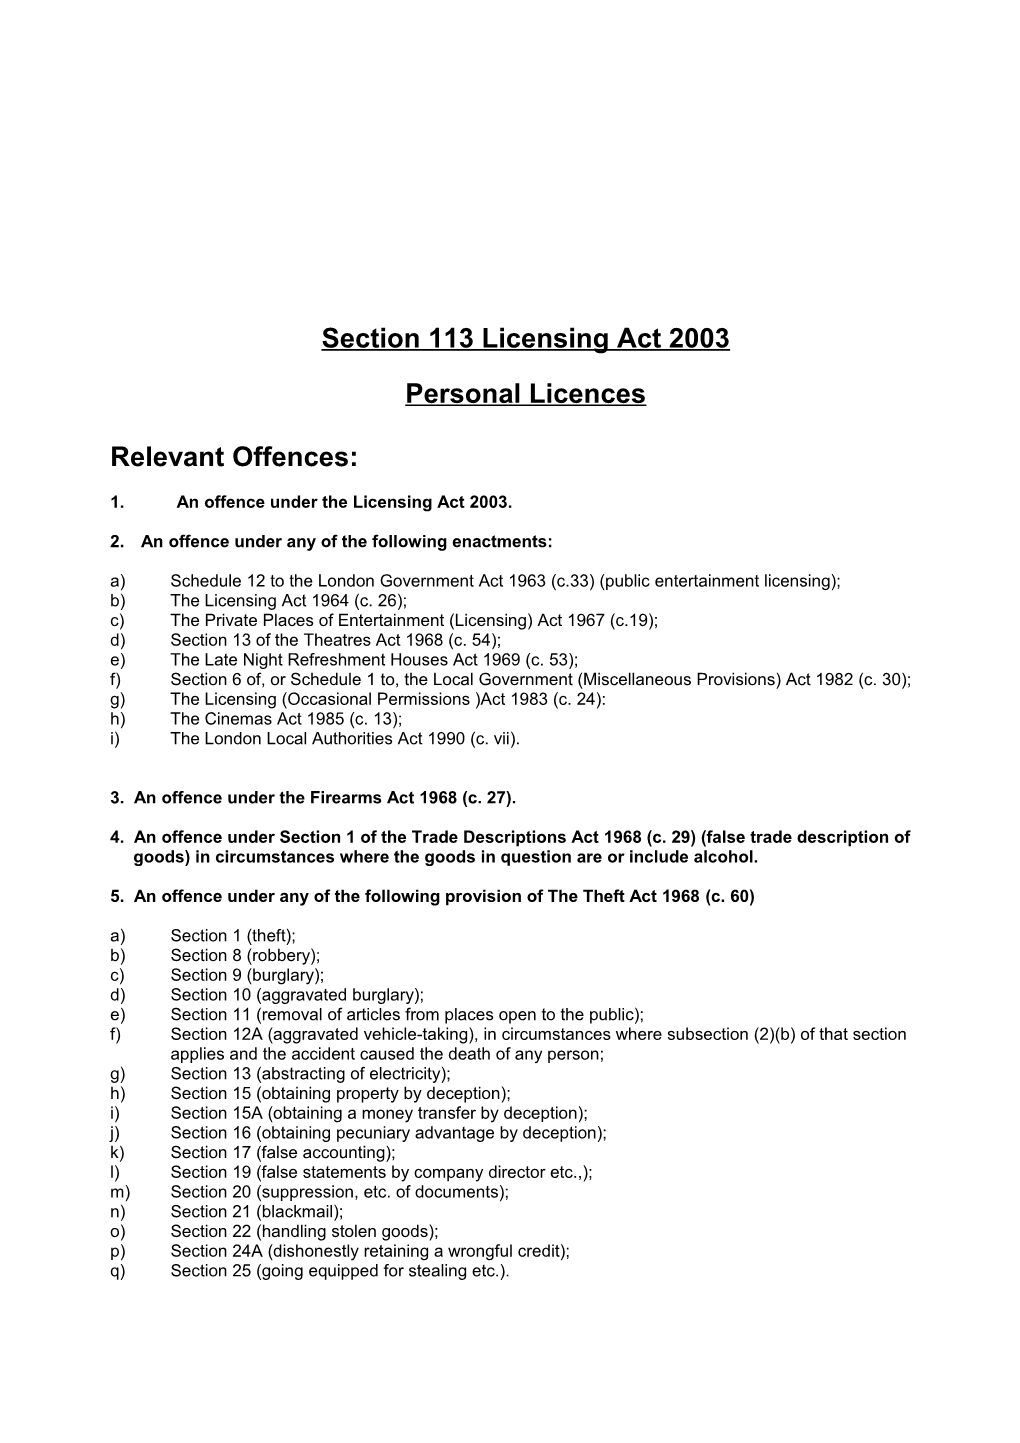 Section 113 Licensing Act 2003